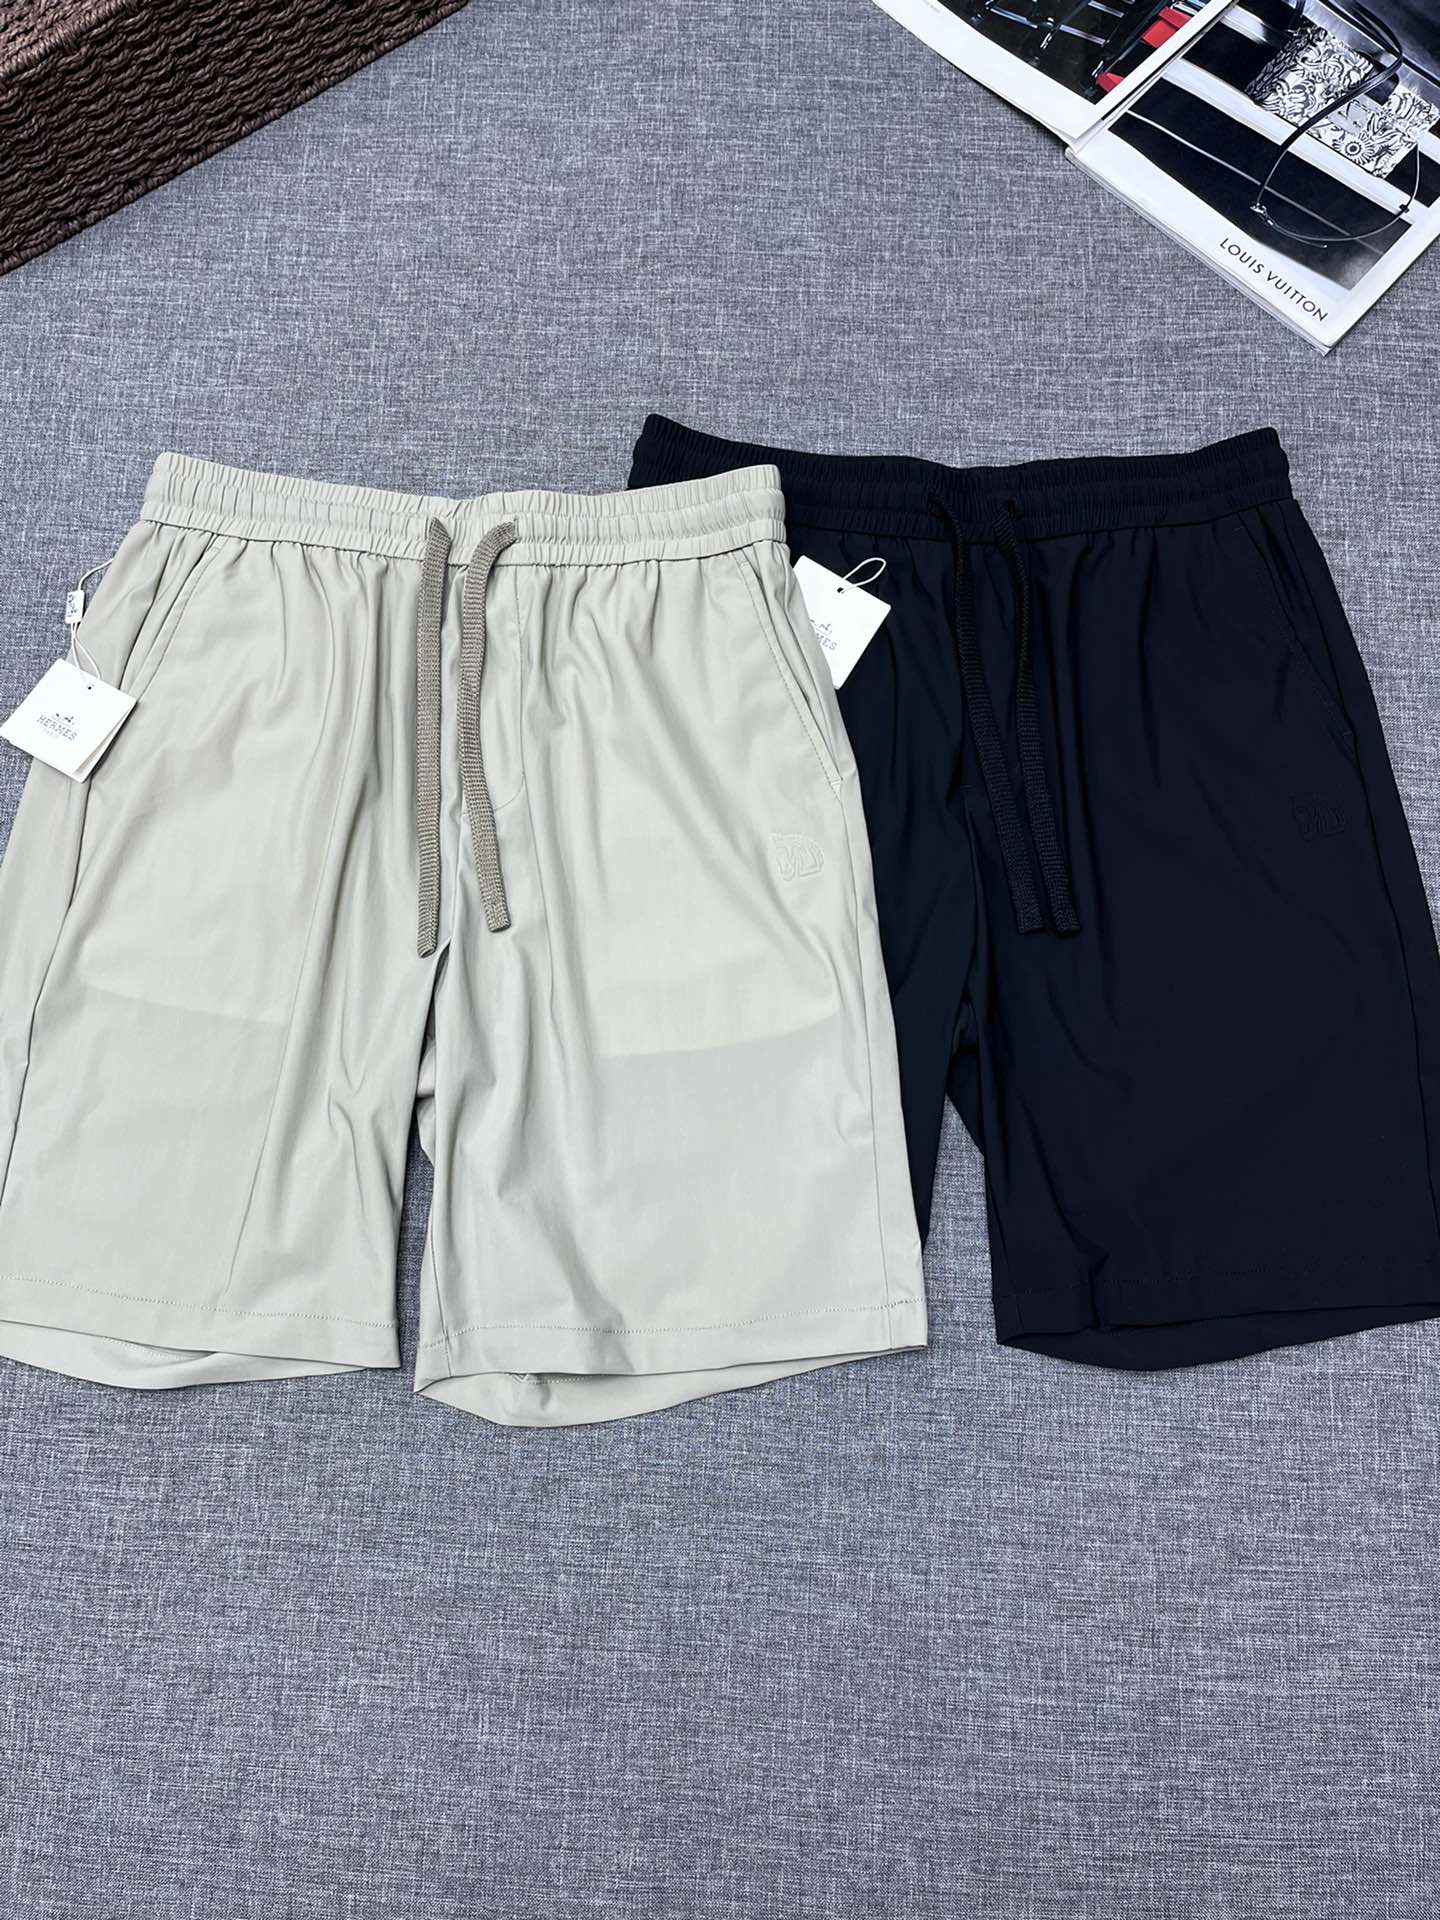 Hermes Clothing Shorts Summer Collection Fashion Casual